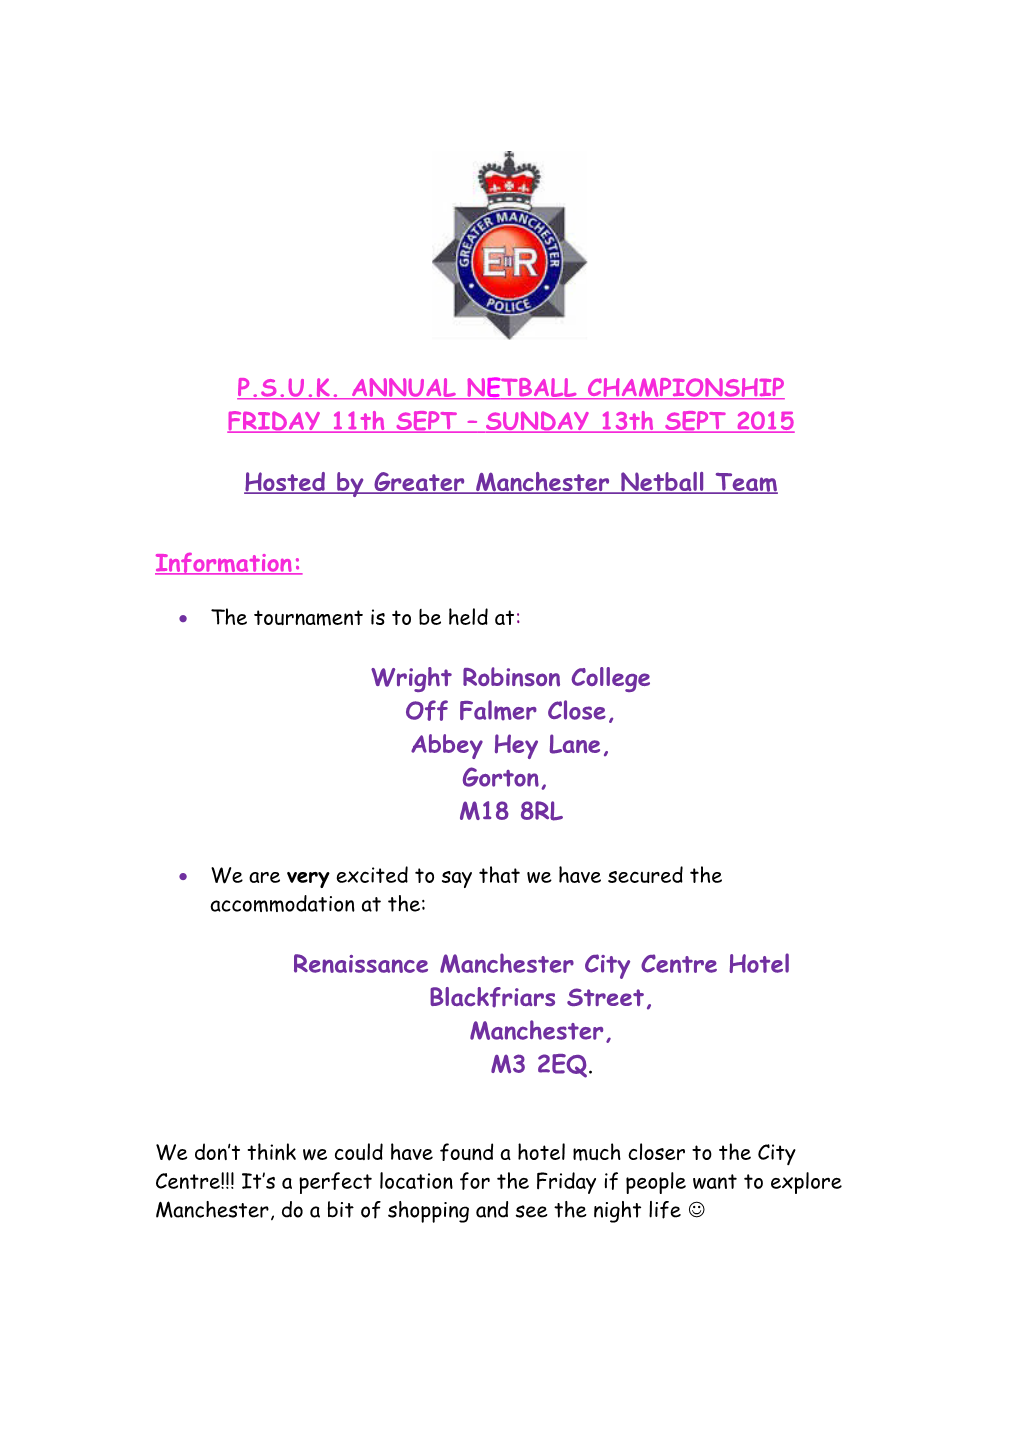 Hosted by Greater Manchester Netball Team